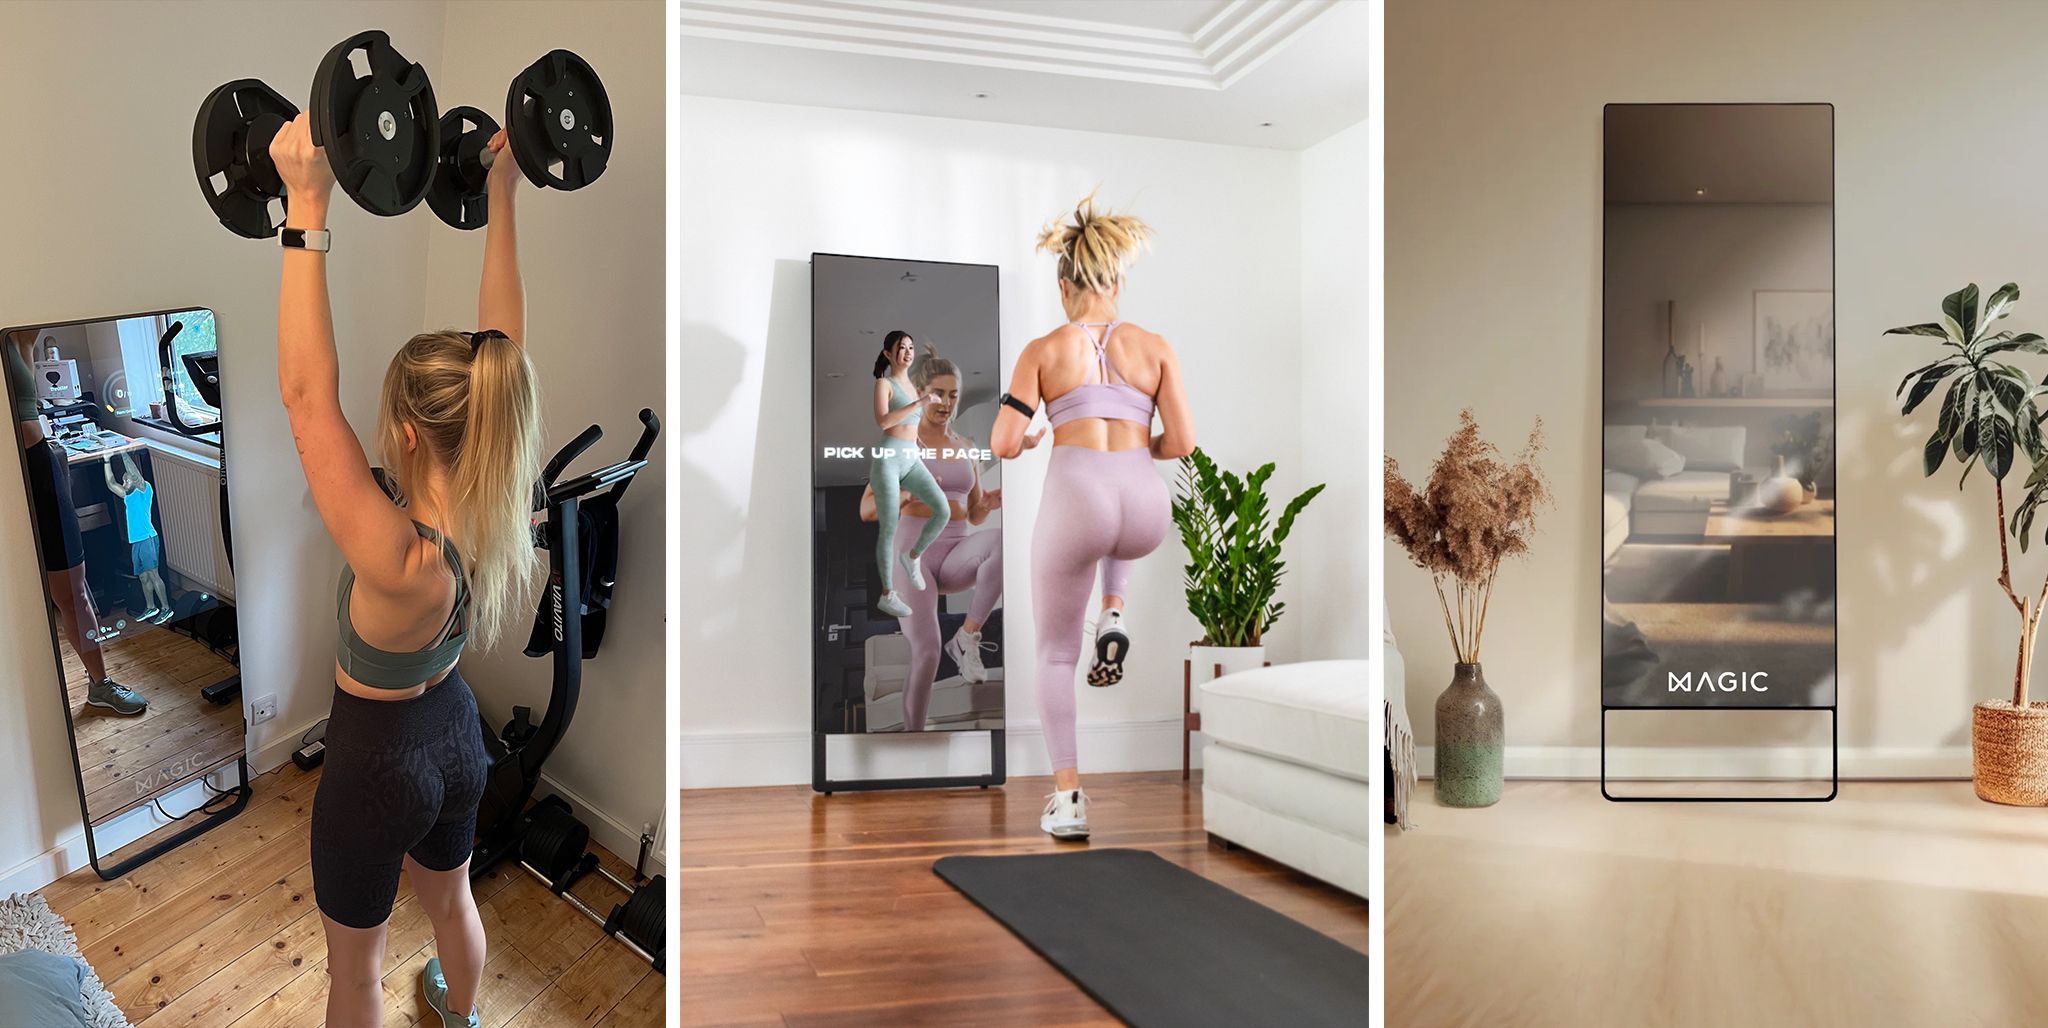 Fiture workout mirror Review: This Mirror competitor holds its own -  Reviewed